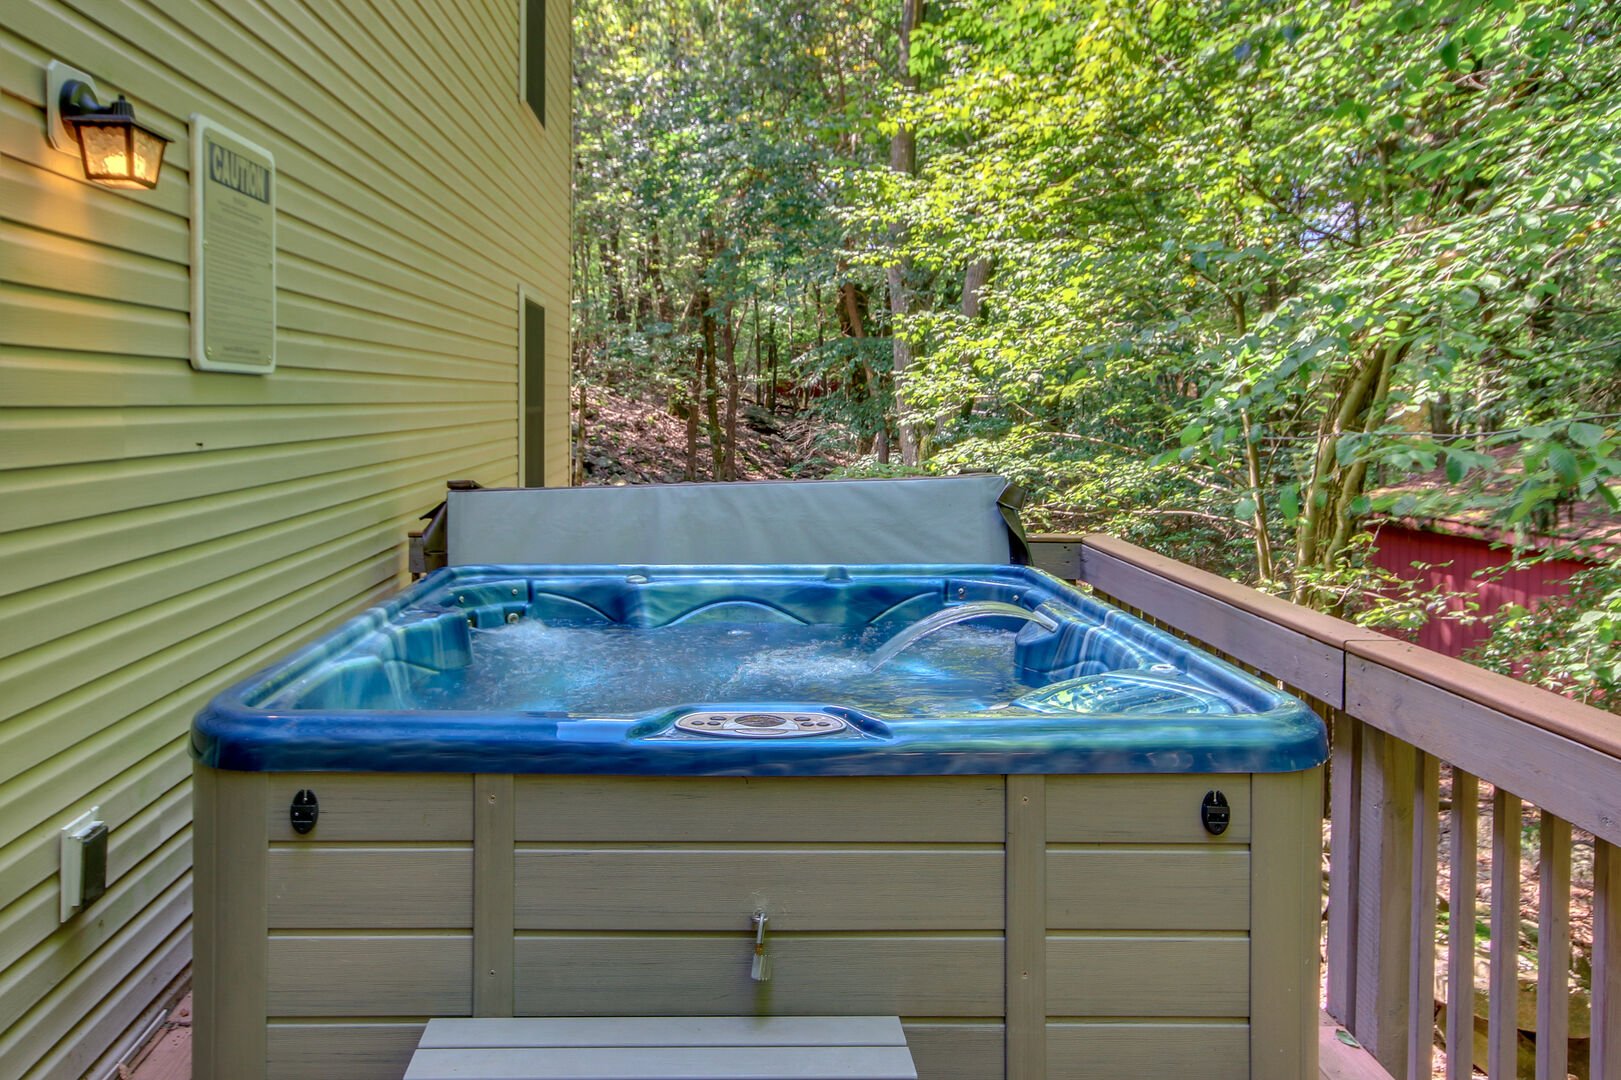 Outdoor hot tub of this Lake Harmony rental.